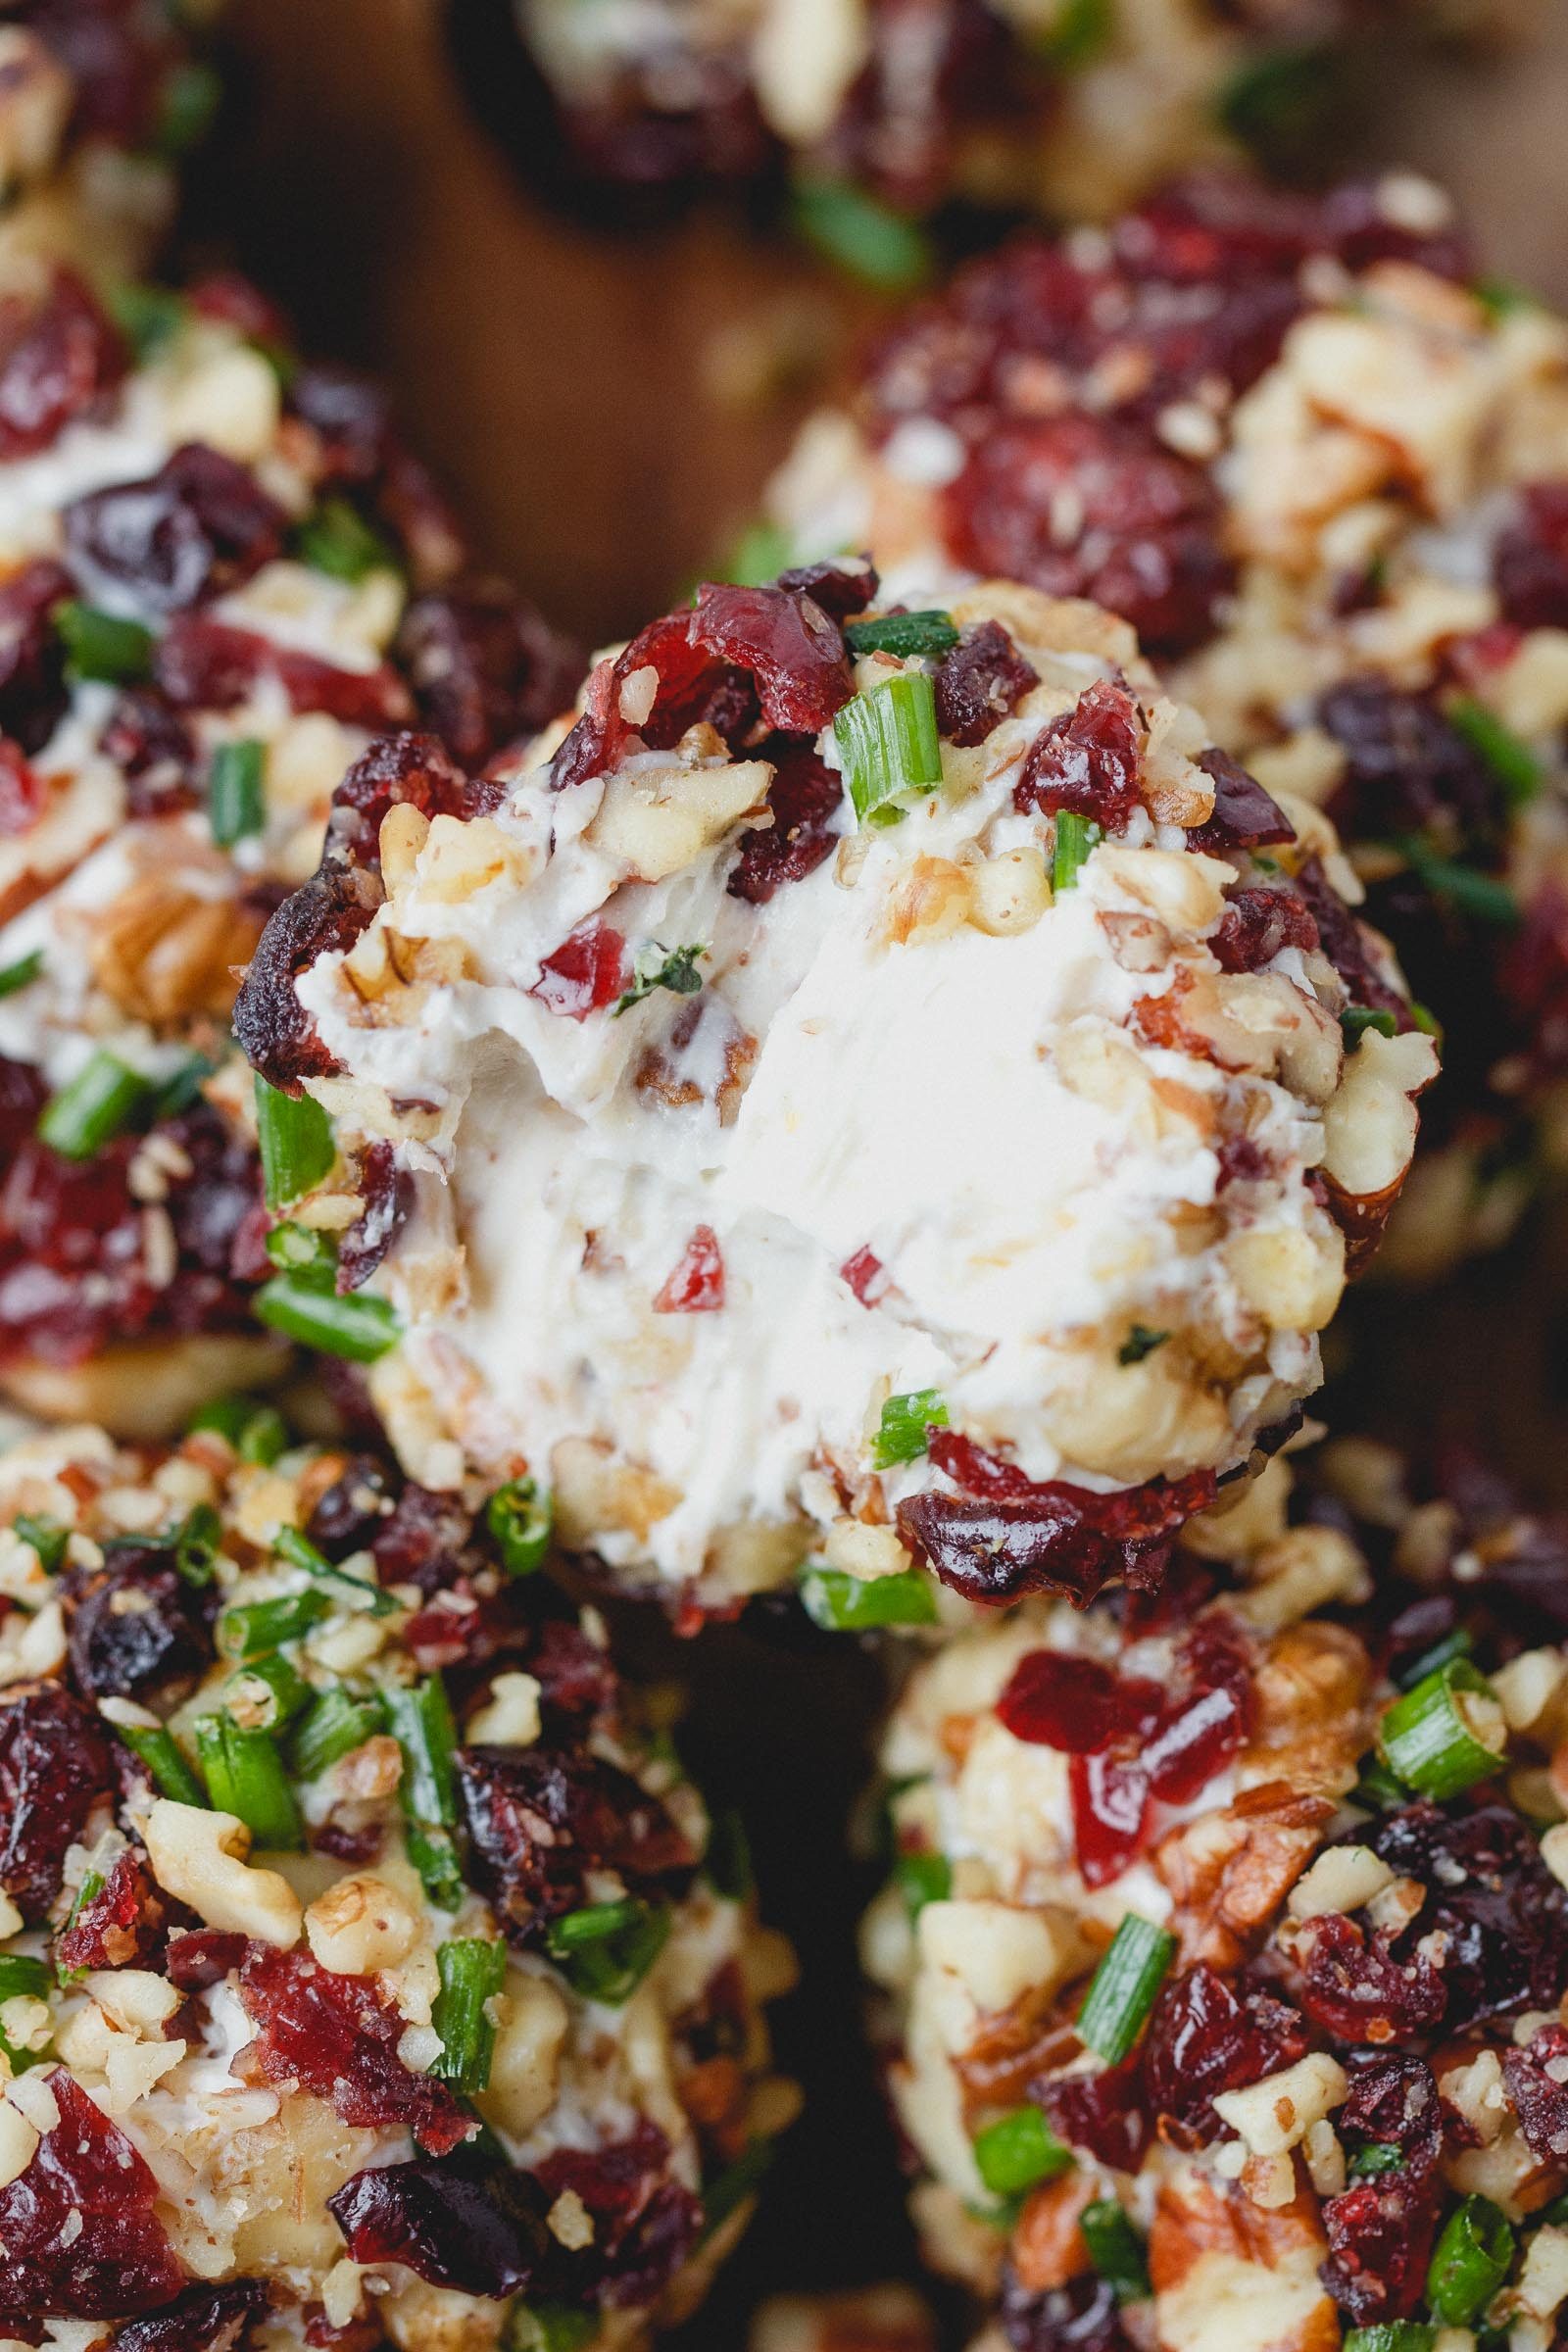 Cranberry Nut Cream Cheese Balls - These super festive cheese balls won't last long on your table - definitely a crowd pleaser!